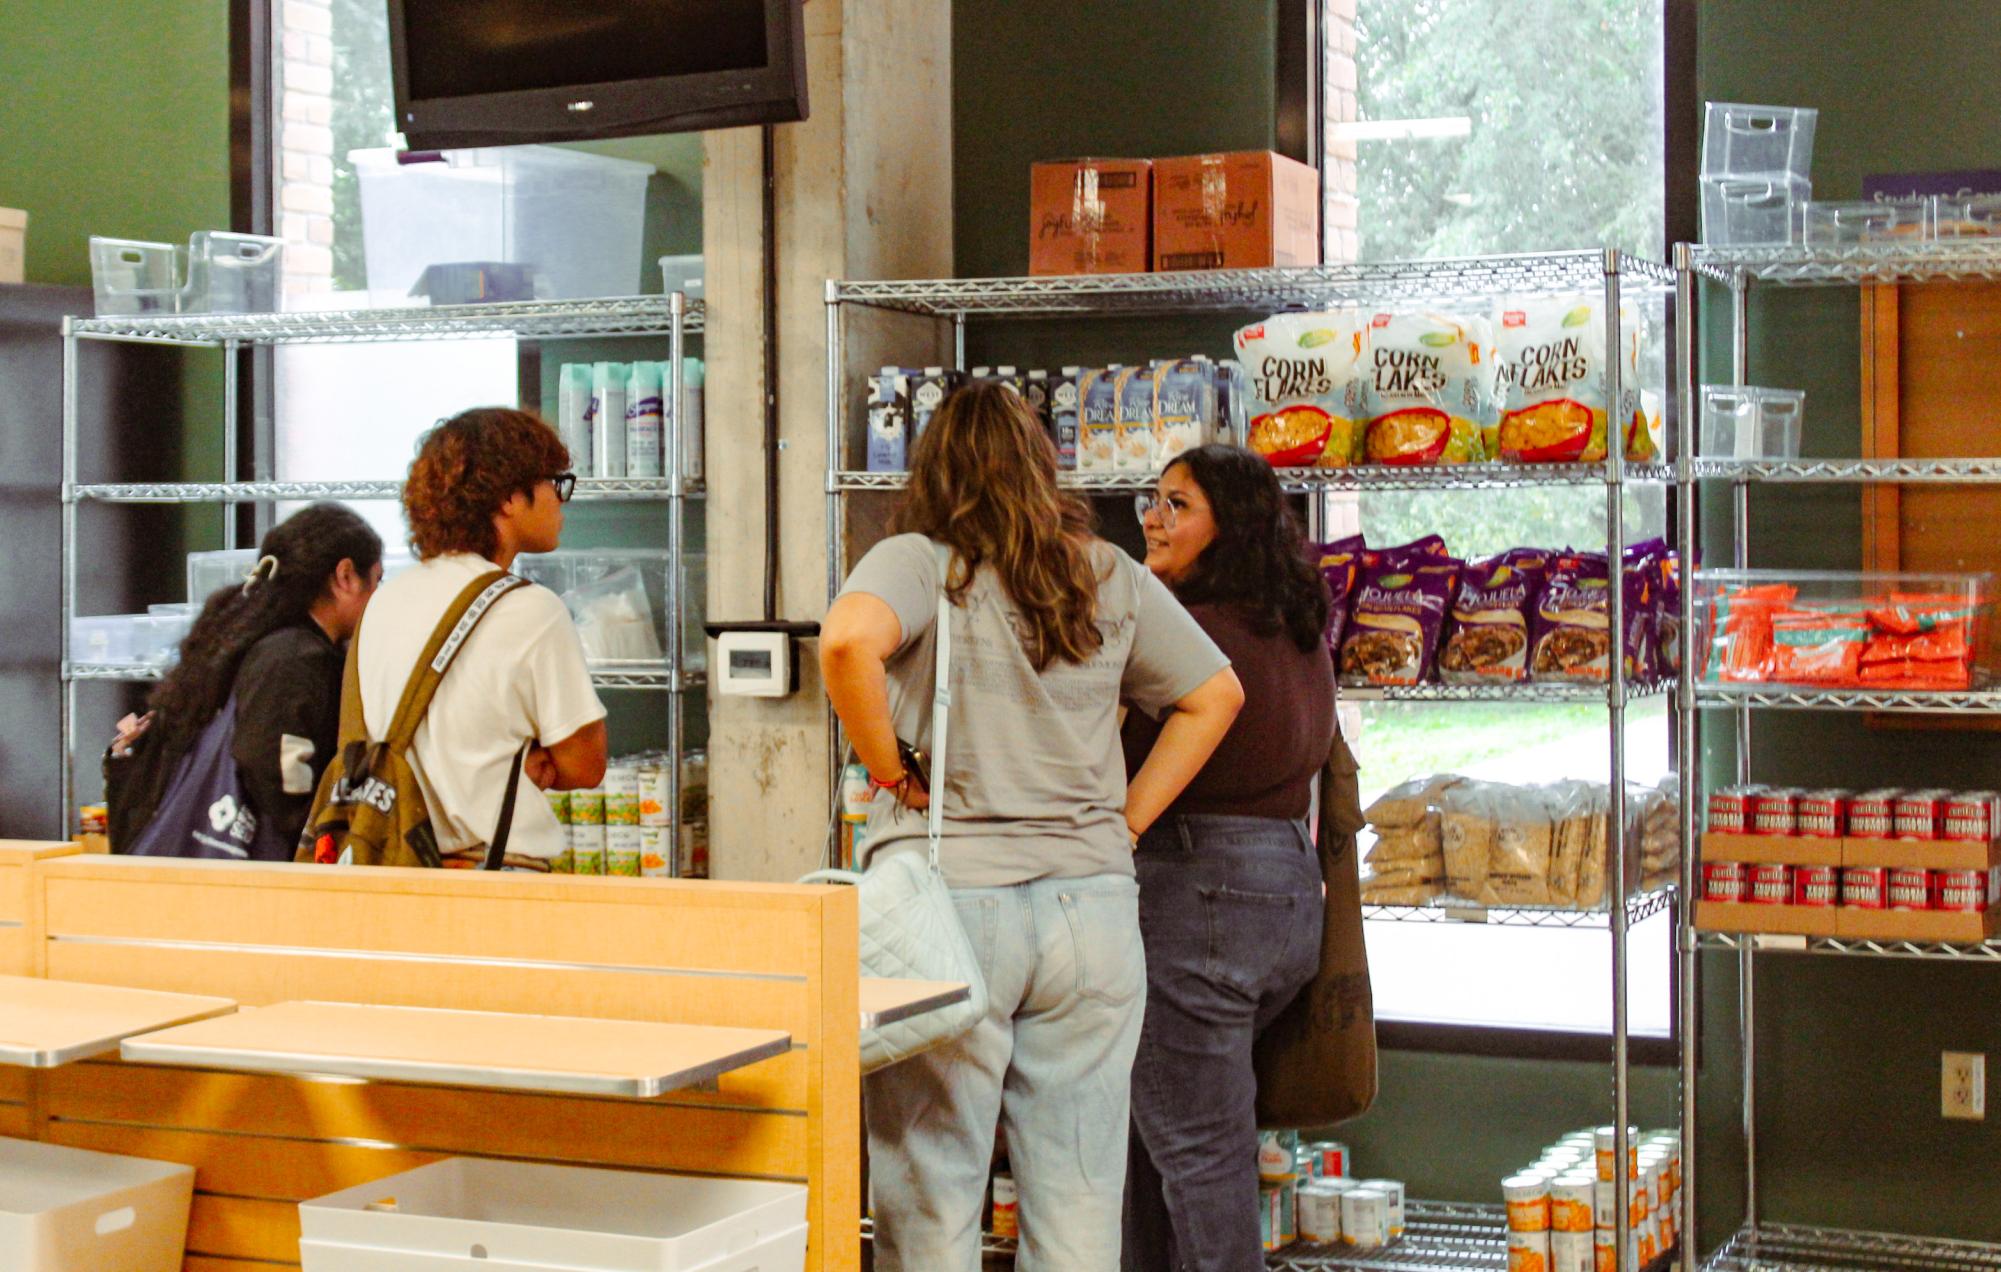 Students gather to view various dry food products placed throughout the pantry on shelves. The Huddle tends to have heavy foot traffic throughout the entire day.